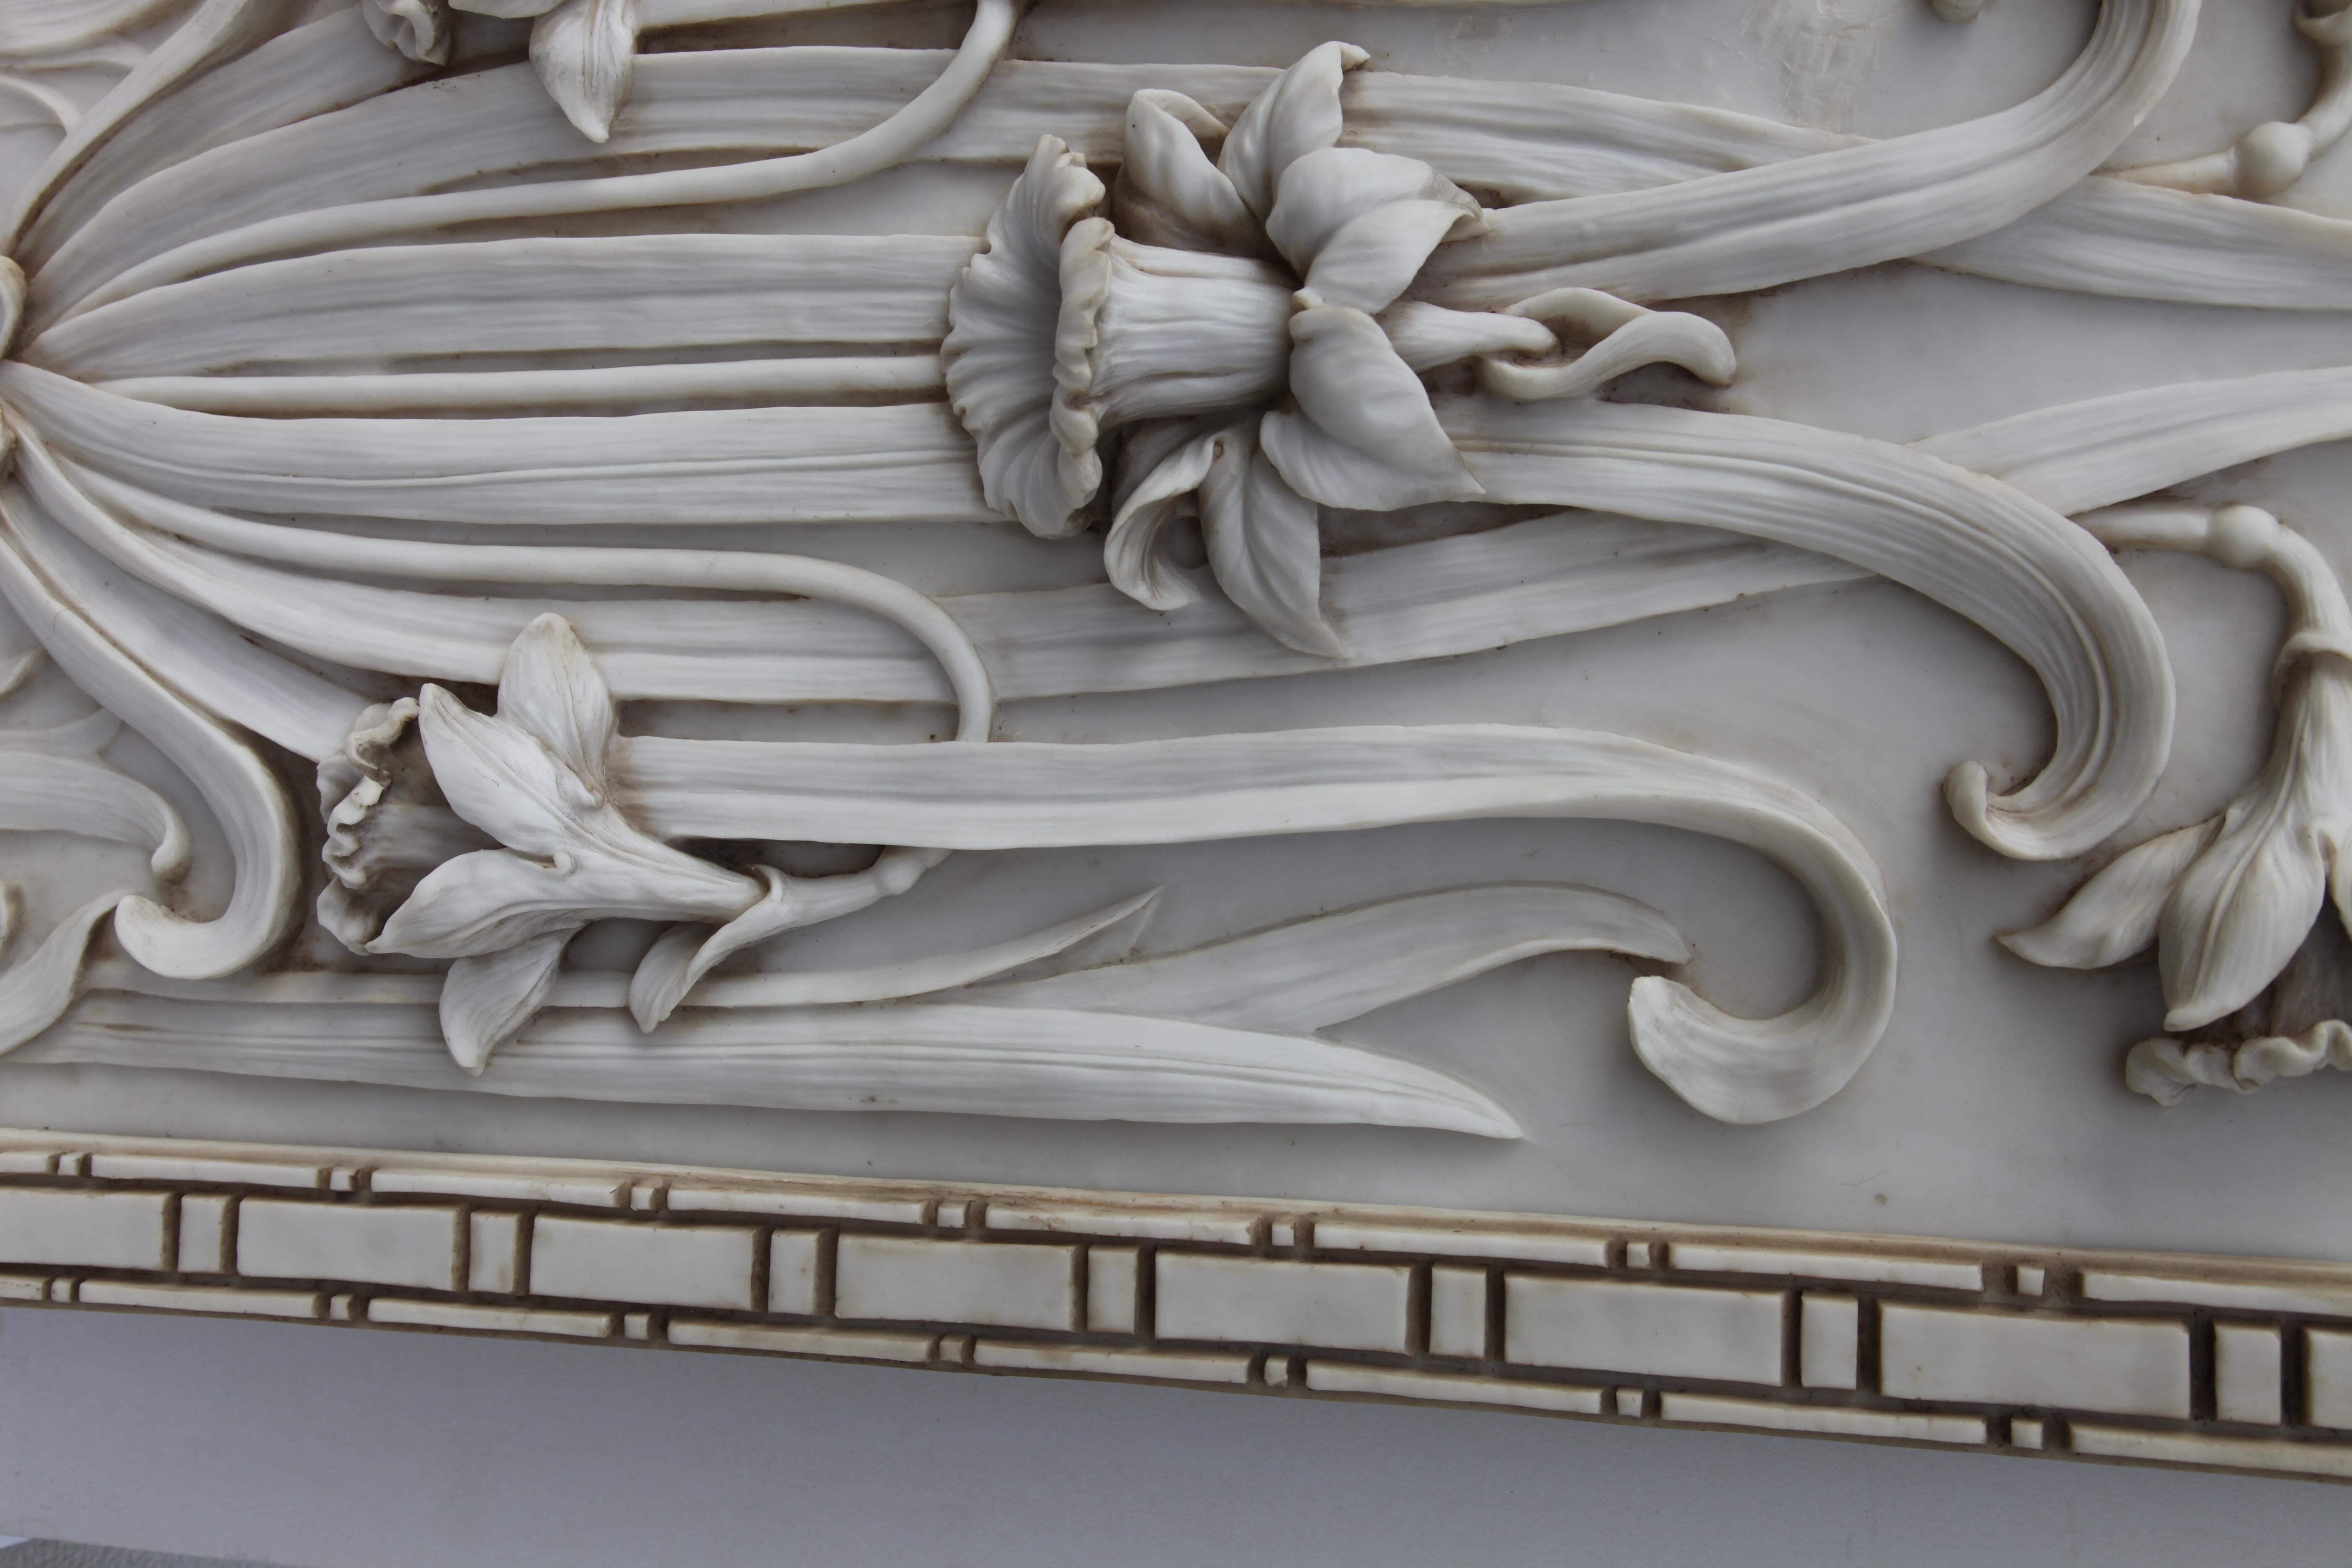 Art Nouveau 3-D Alabaster Sculptural Panel with Foliage and Daffodils / Jonquils 1